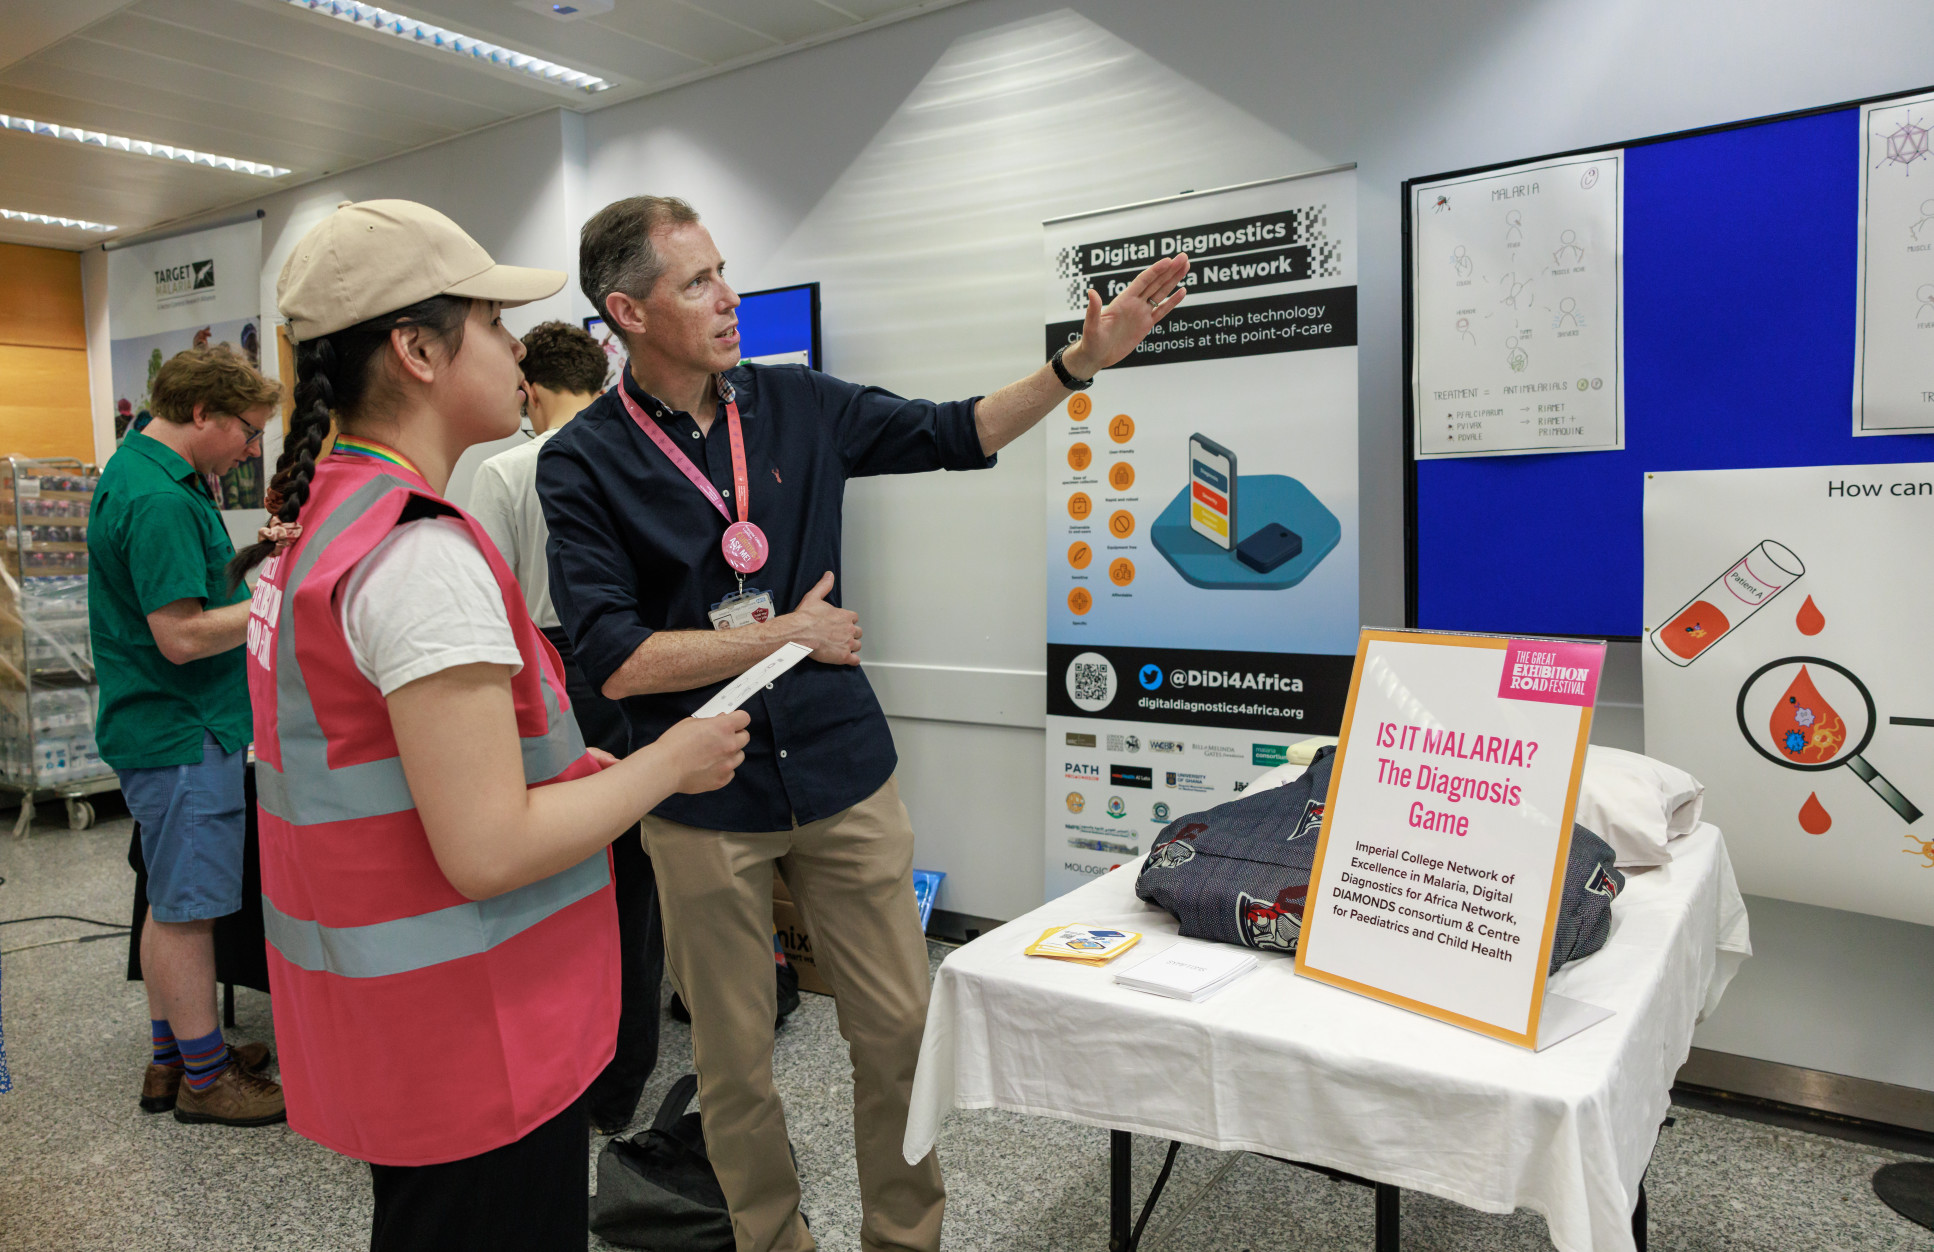 A researcher pointing to posters in conversation with a young attendee